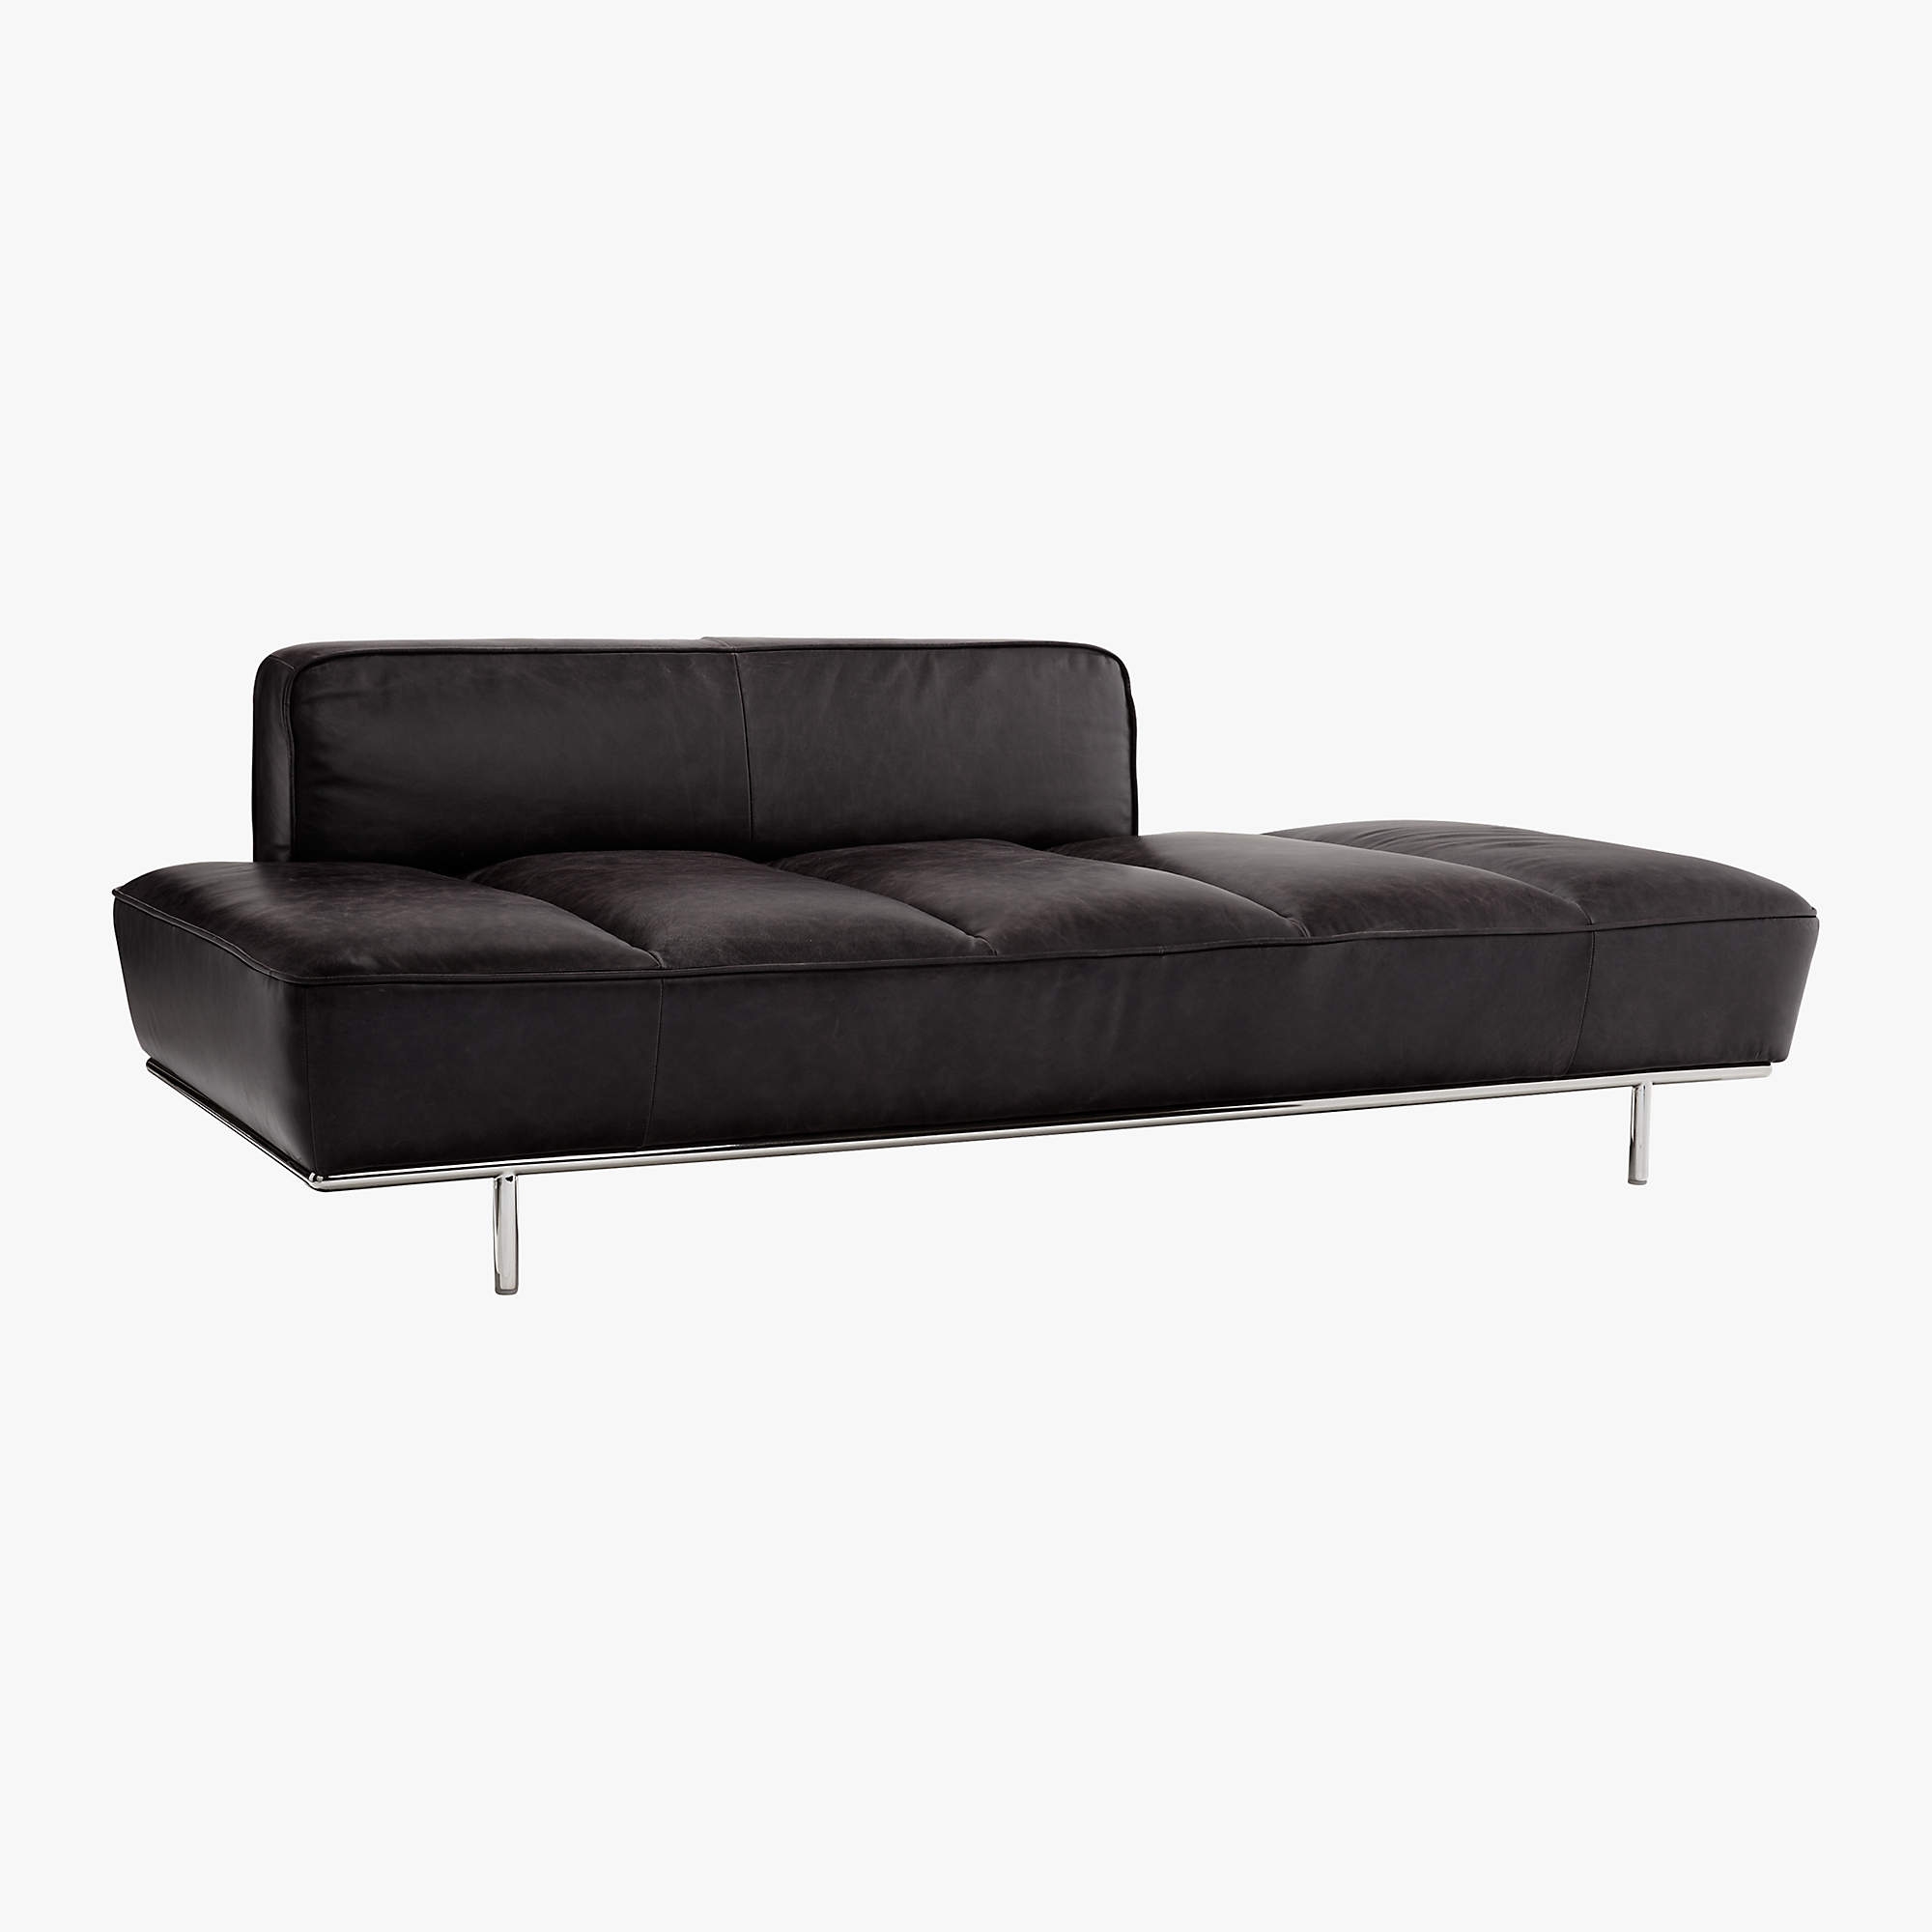 Lawndale Black Leather Daybed with Chrome Base - Image 2